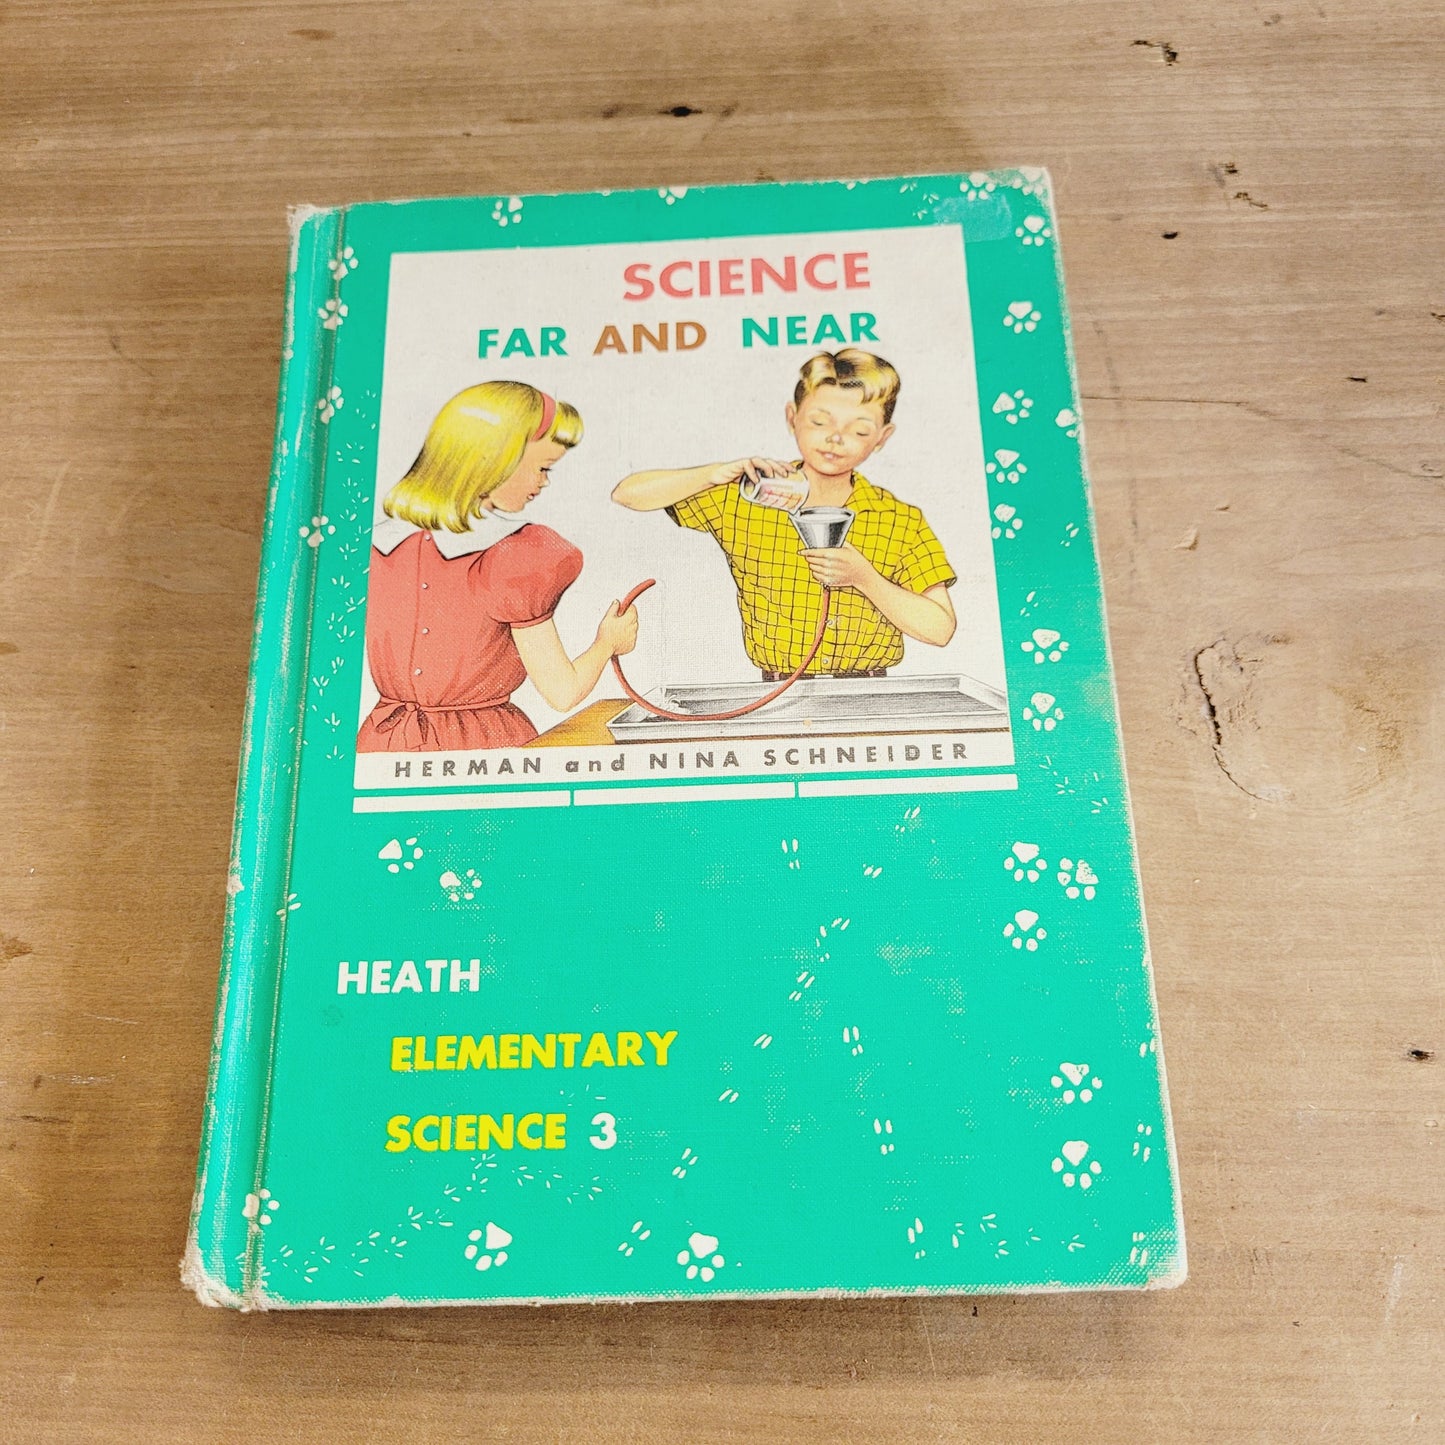 Vintage 1959 Science Far and Near Book